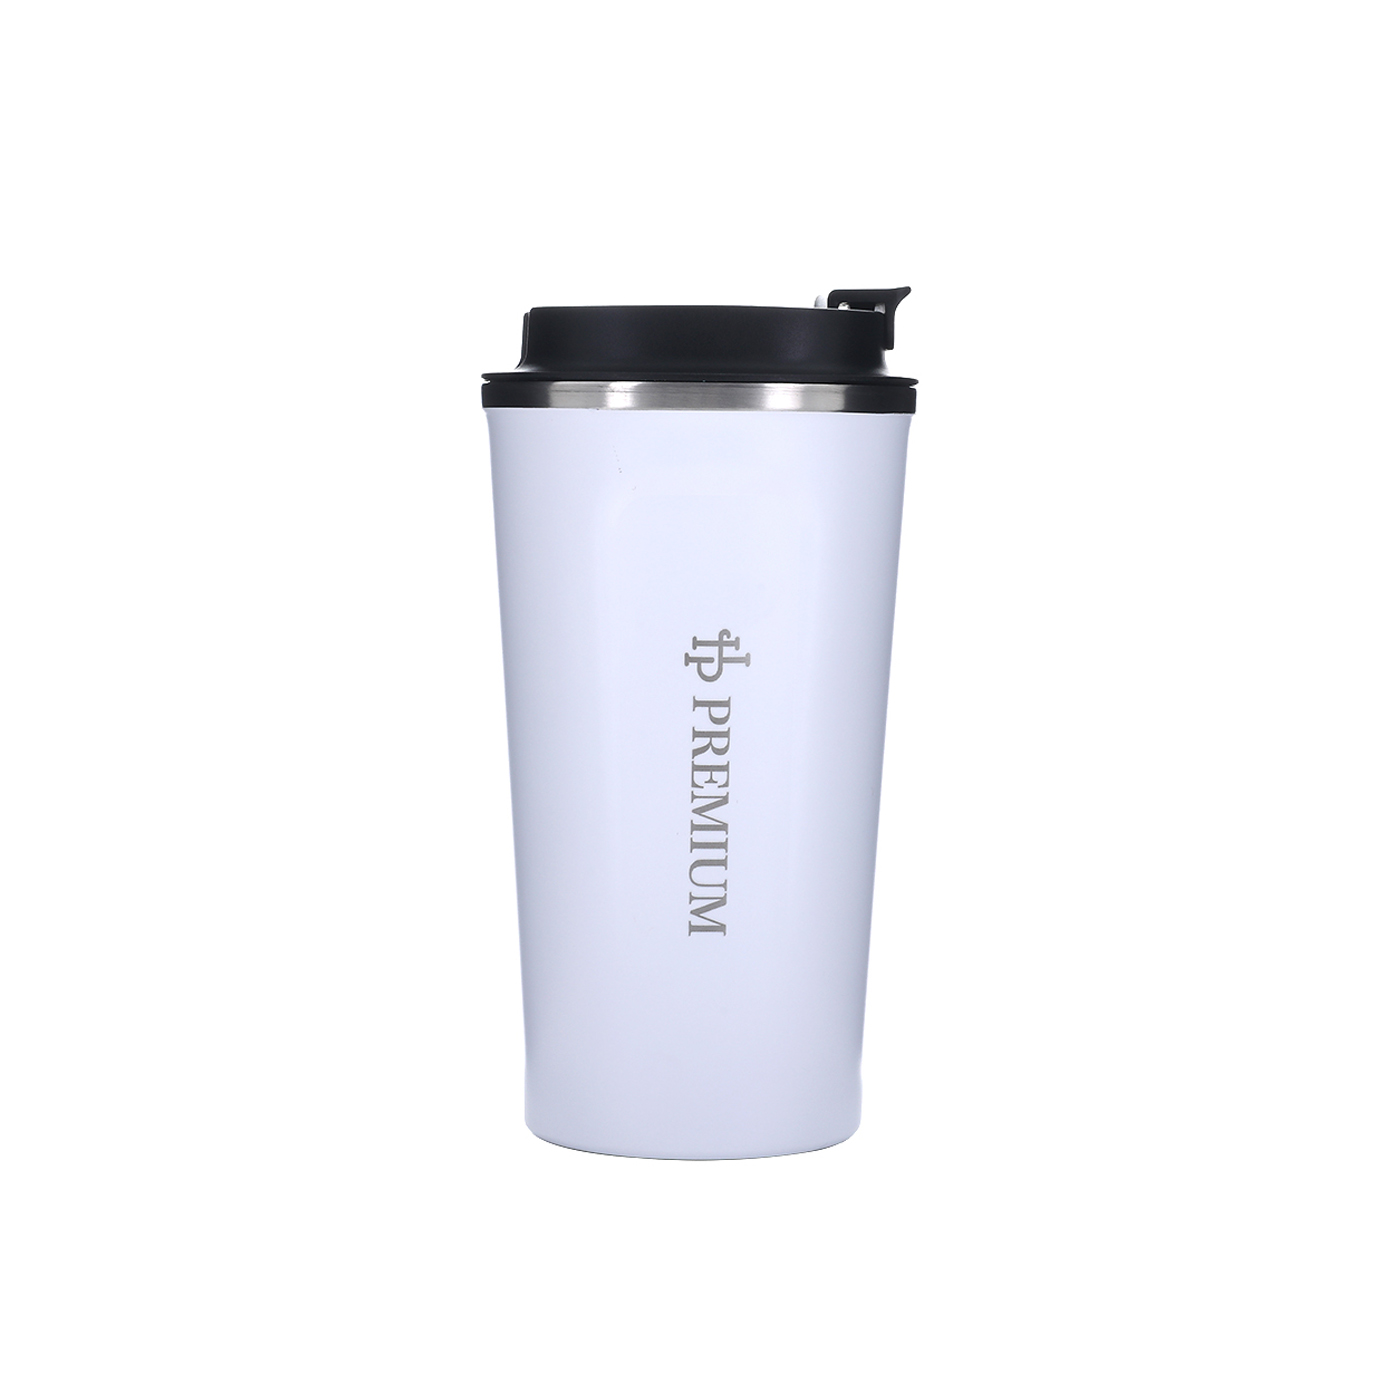 17 oz. Insulated Mug With Leakproof Lid1